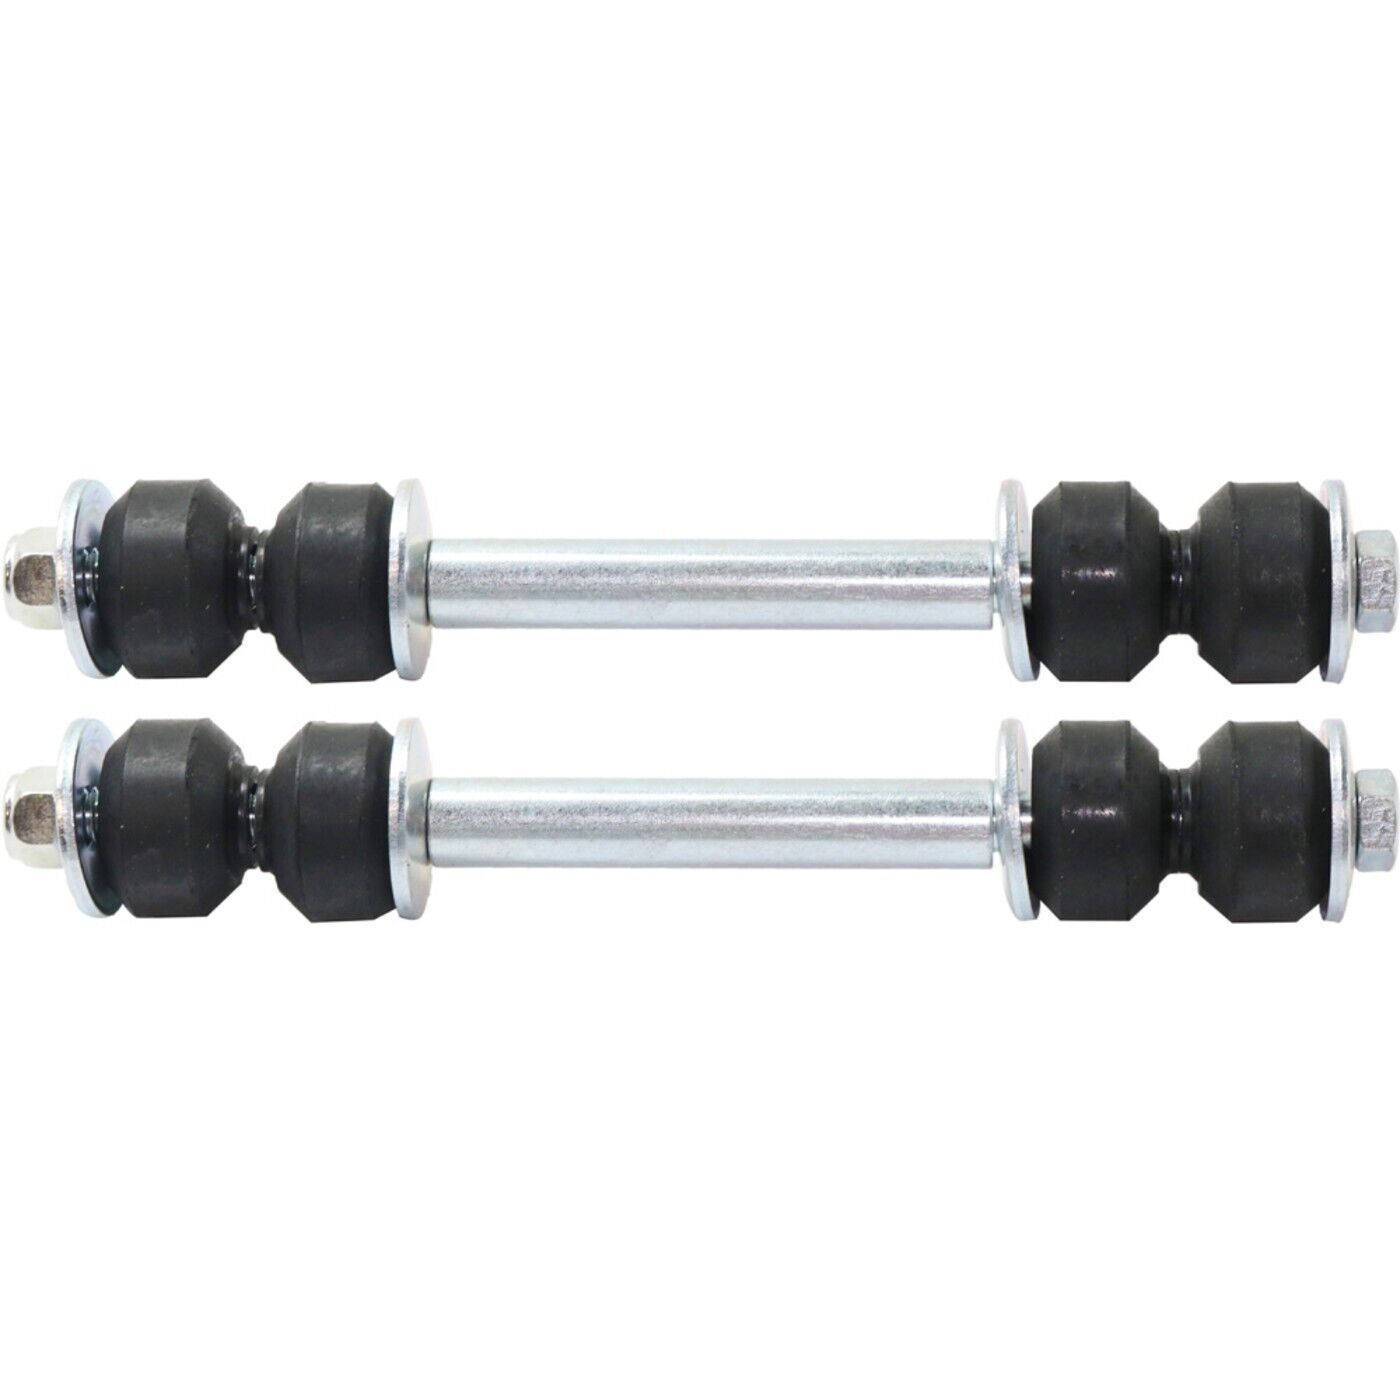 Pair Set of 2 Sway Bar Links Front for Chevy Olds S10 Pickup S-10 BLAZER Jimmy